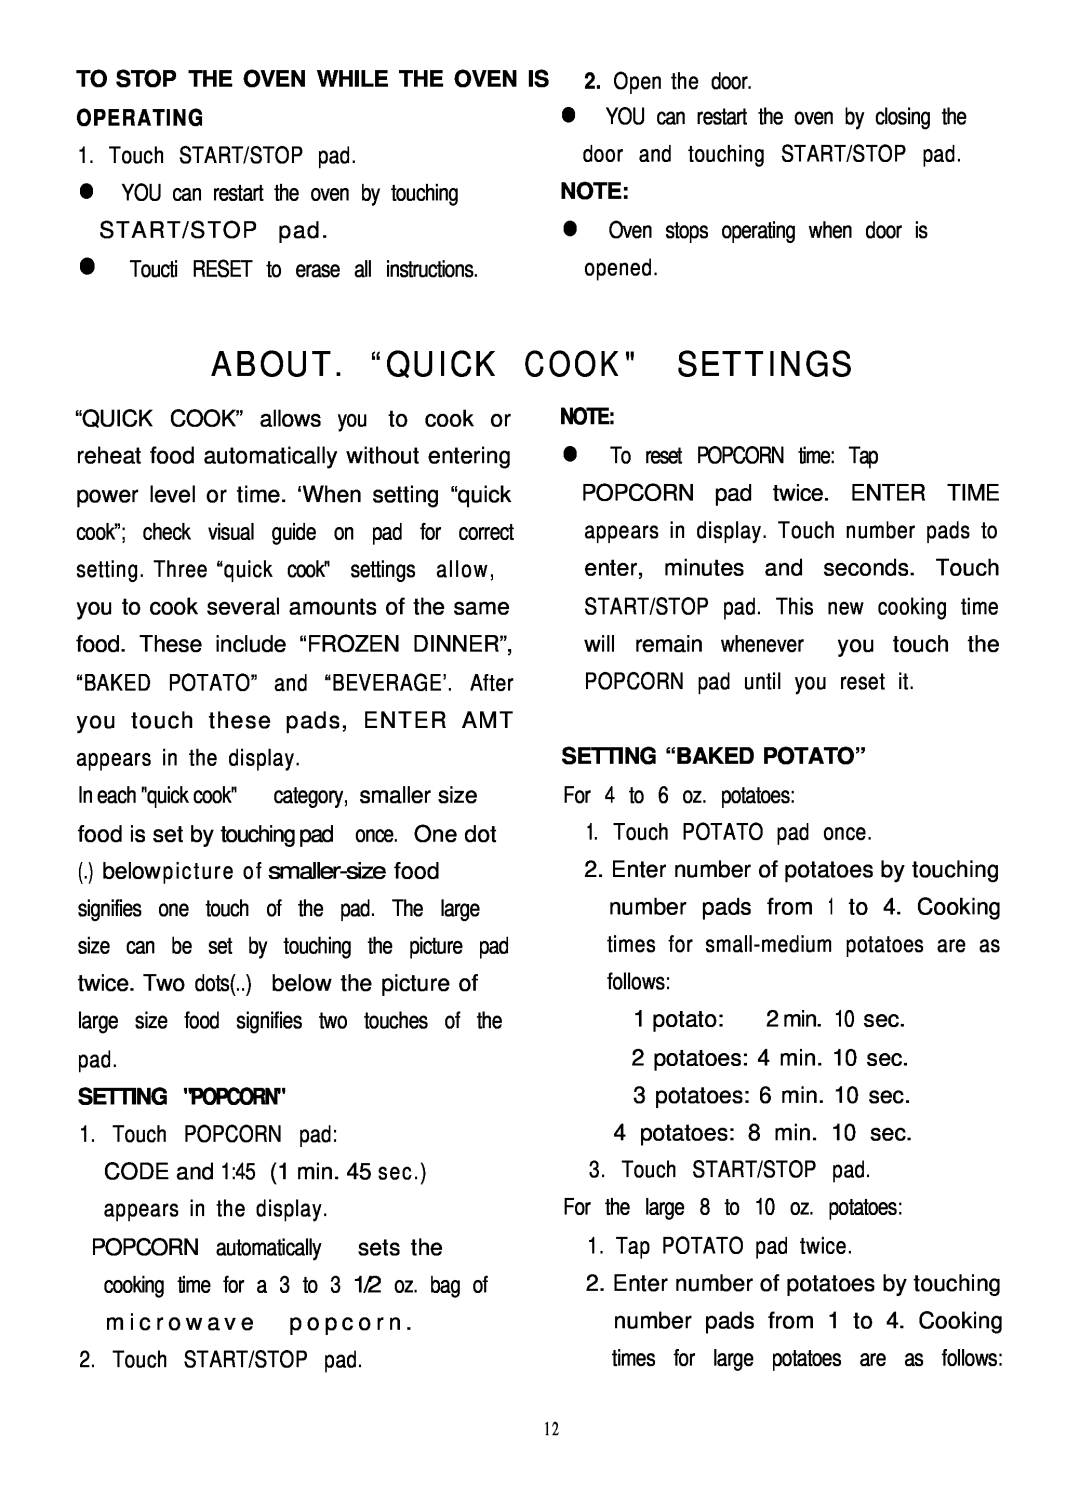 Sunbeam SMW1100 owner manual About. “Quick Cook Settings, To Stop The Oven While The Oven Is Operating, Setting Popcorn 